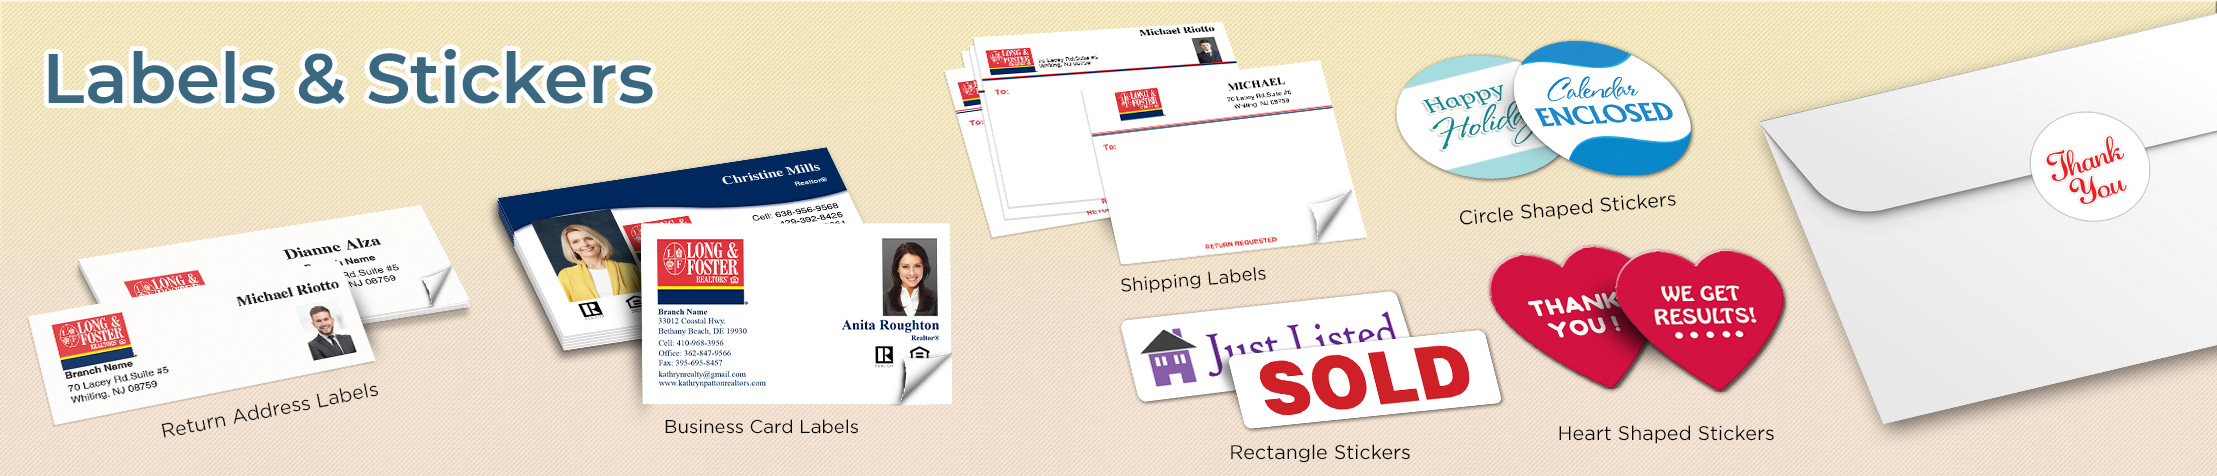 Long and Foster Real Estate Labels and Stickers - Long and Foster  business card labels, return address labels, shipping labels, and assorted stickers | BestPrintBuy.com